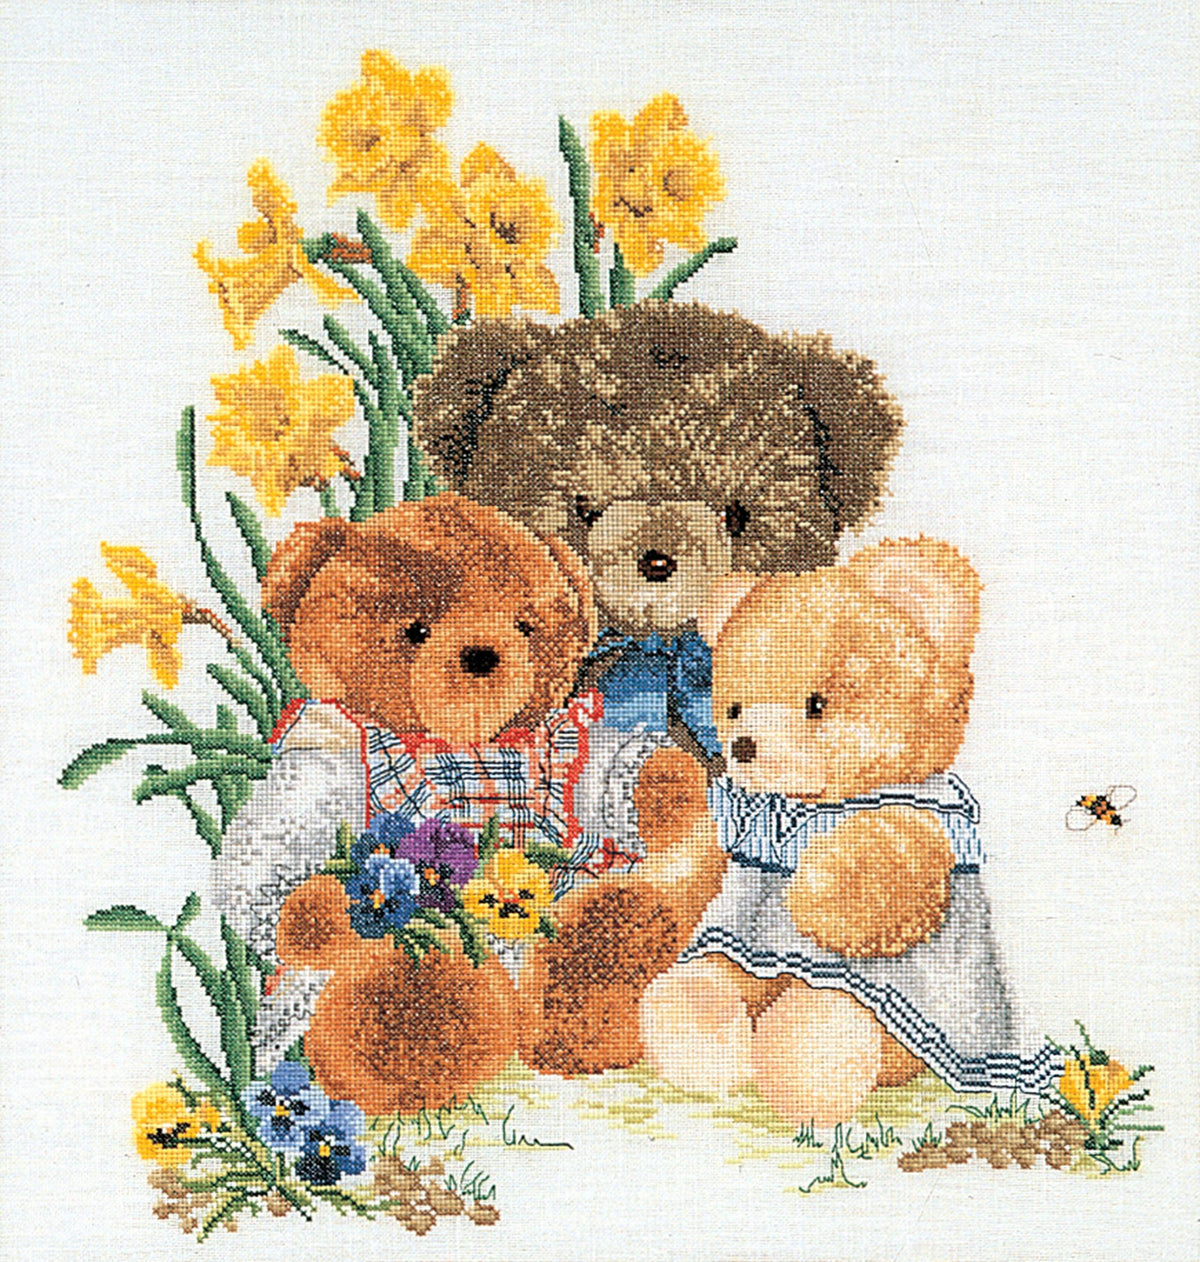 Thea Gouverneur - Counted Cross Stitch Kit - Teddy Bears - Aida - 16 count - 2048A - Thea Gouverneur Since 1959